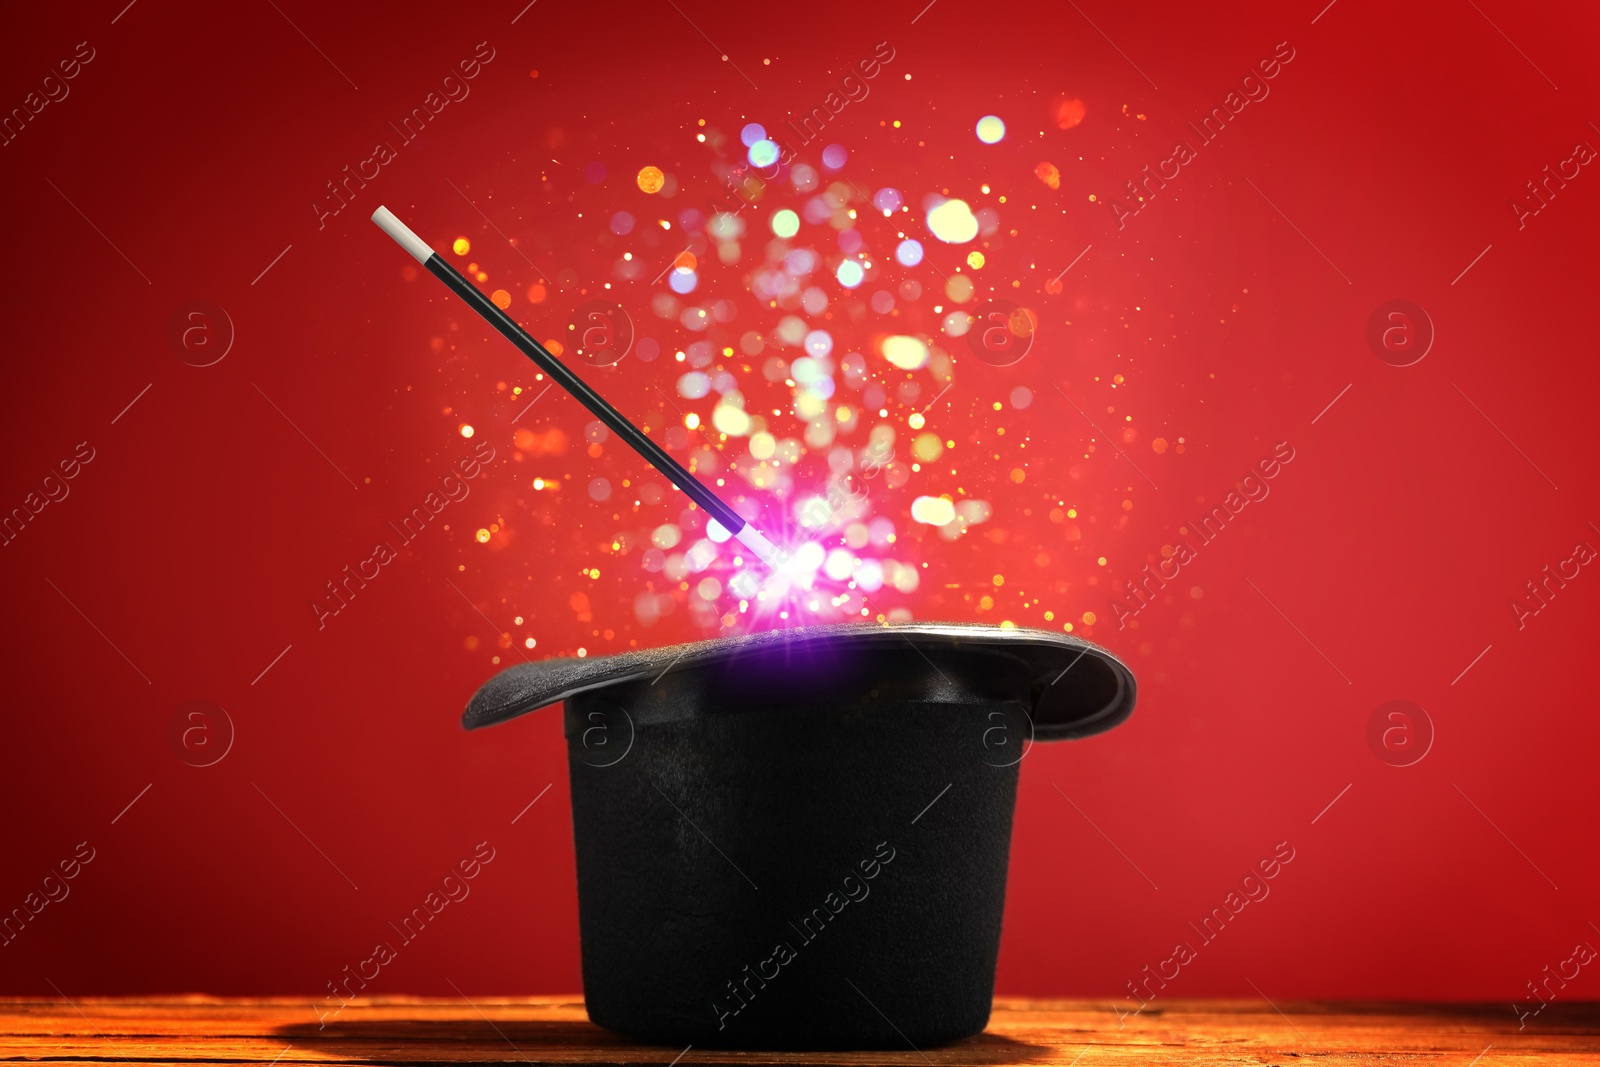 Image of Wizard's hat with wand and magical light on red background